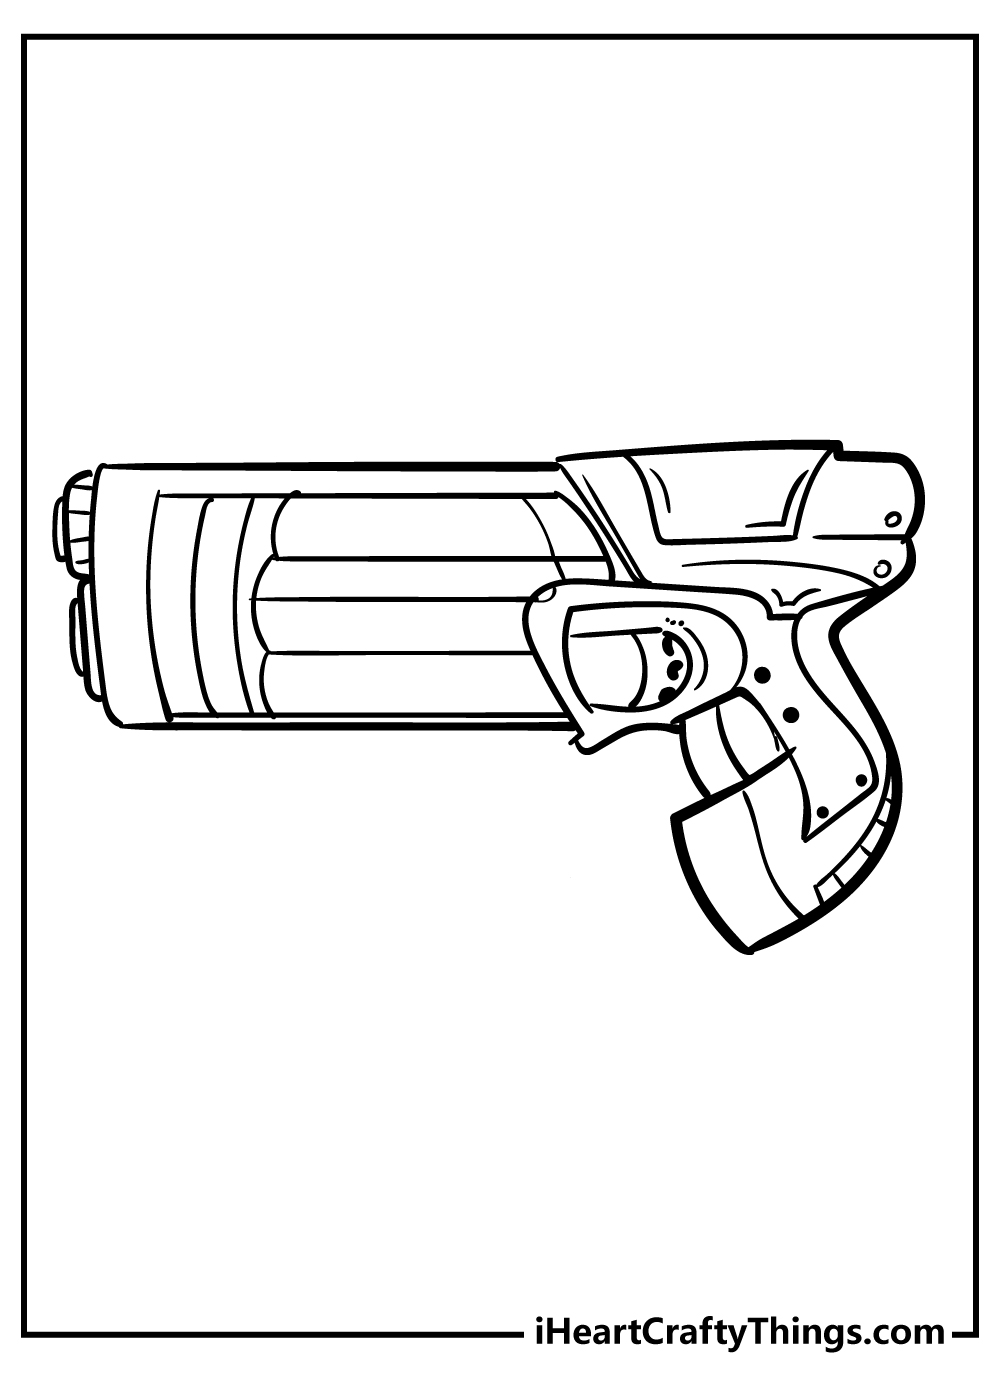 Nerf Gun Coloring Book for adults free download